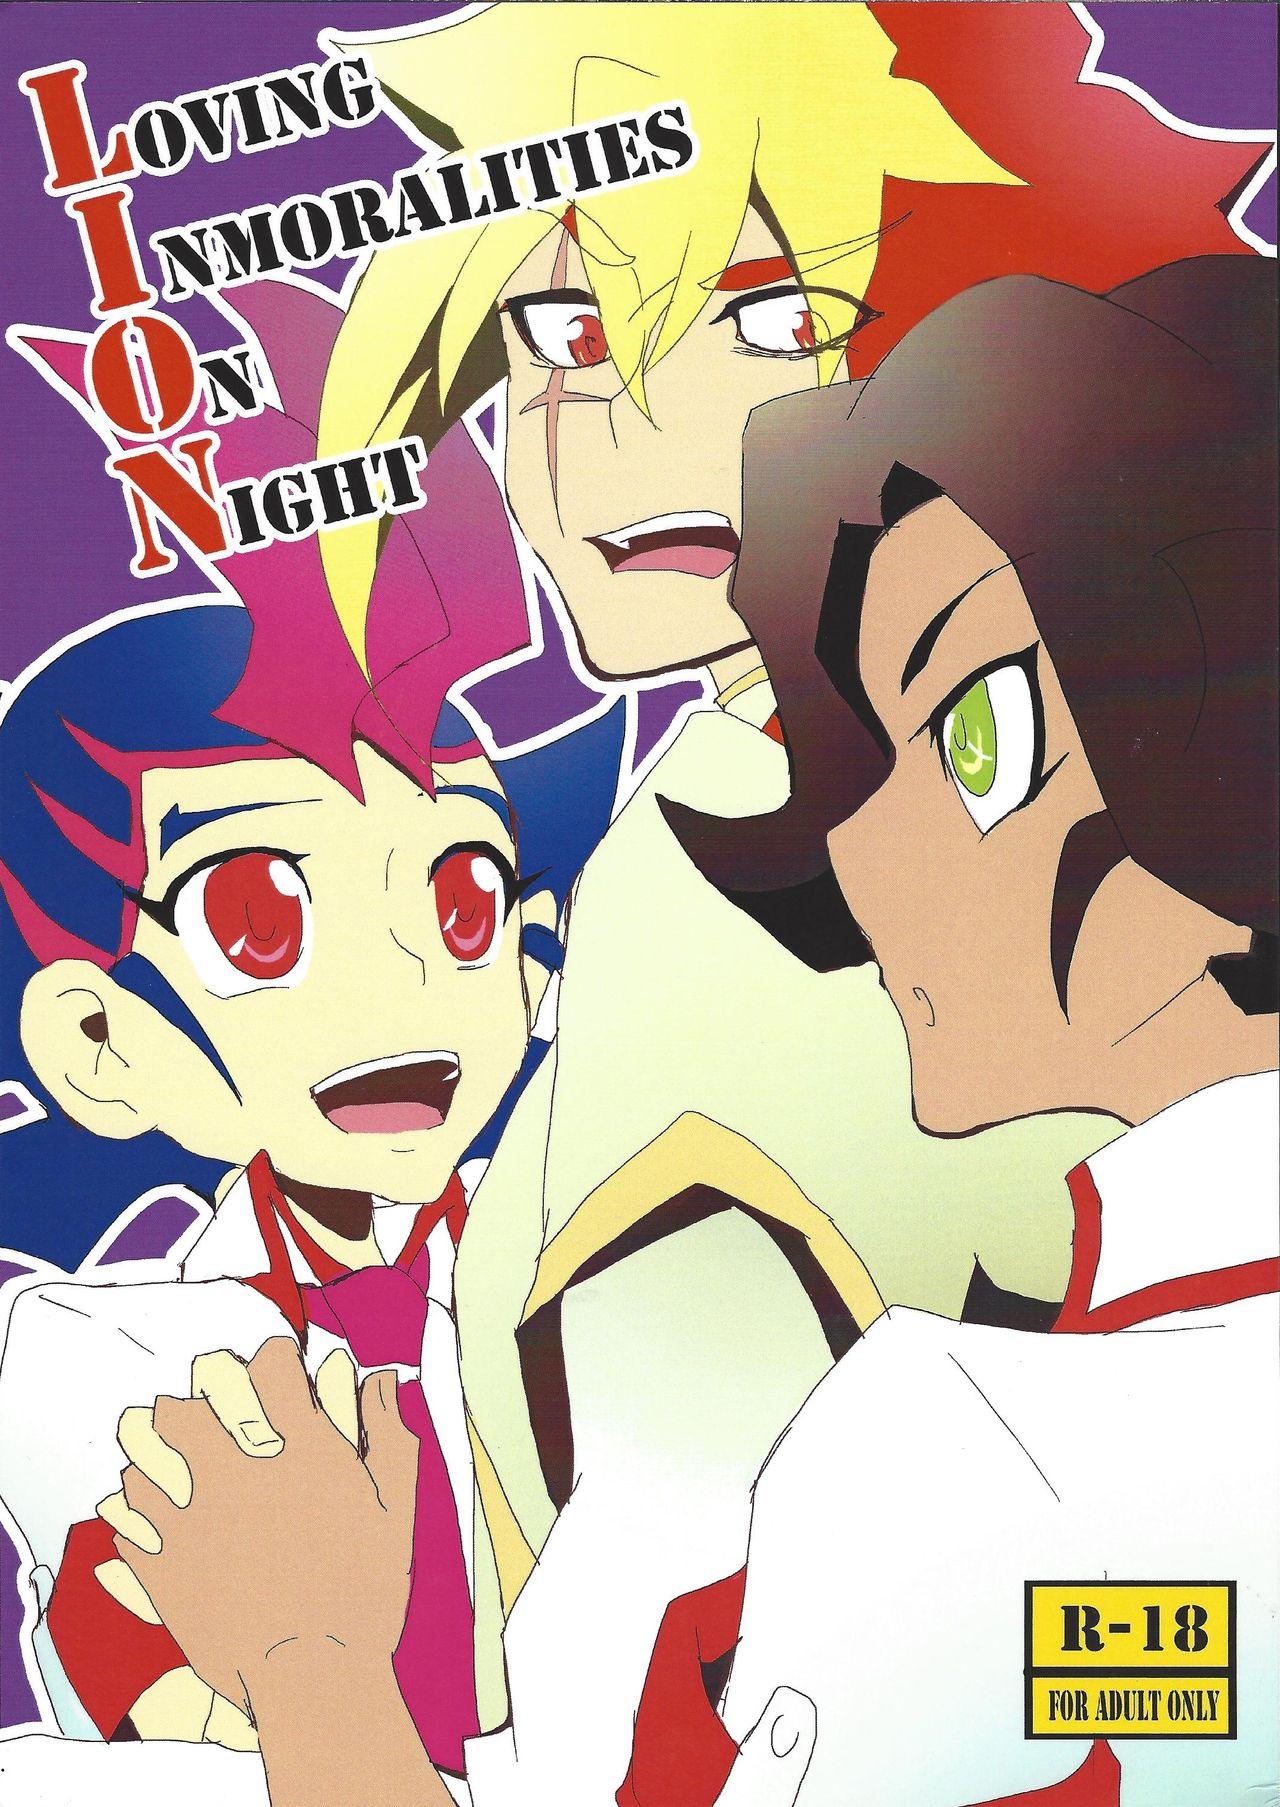 Pay LOVING INMORALITIES ON NIGHT - Yu-gi-oh zexal Esposa - Picture 1